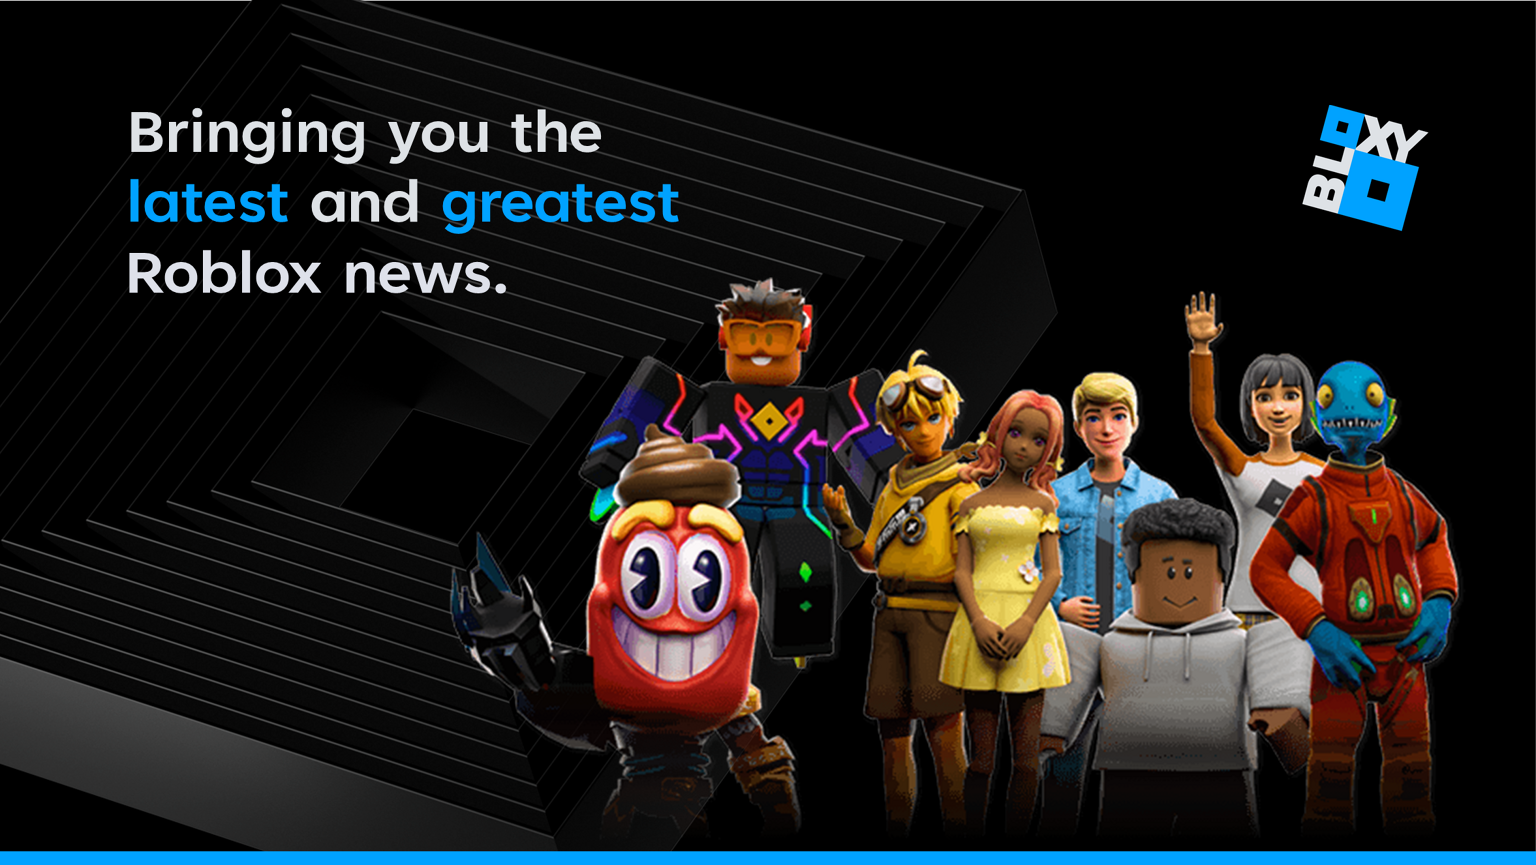 New Avatar Features Coming Soon to Roblox, by Bloxy News